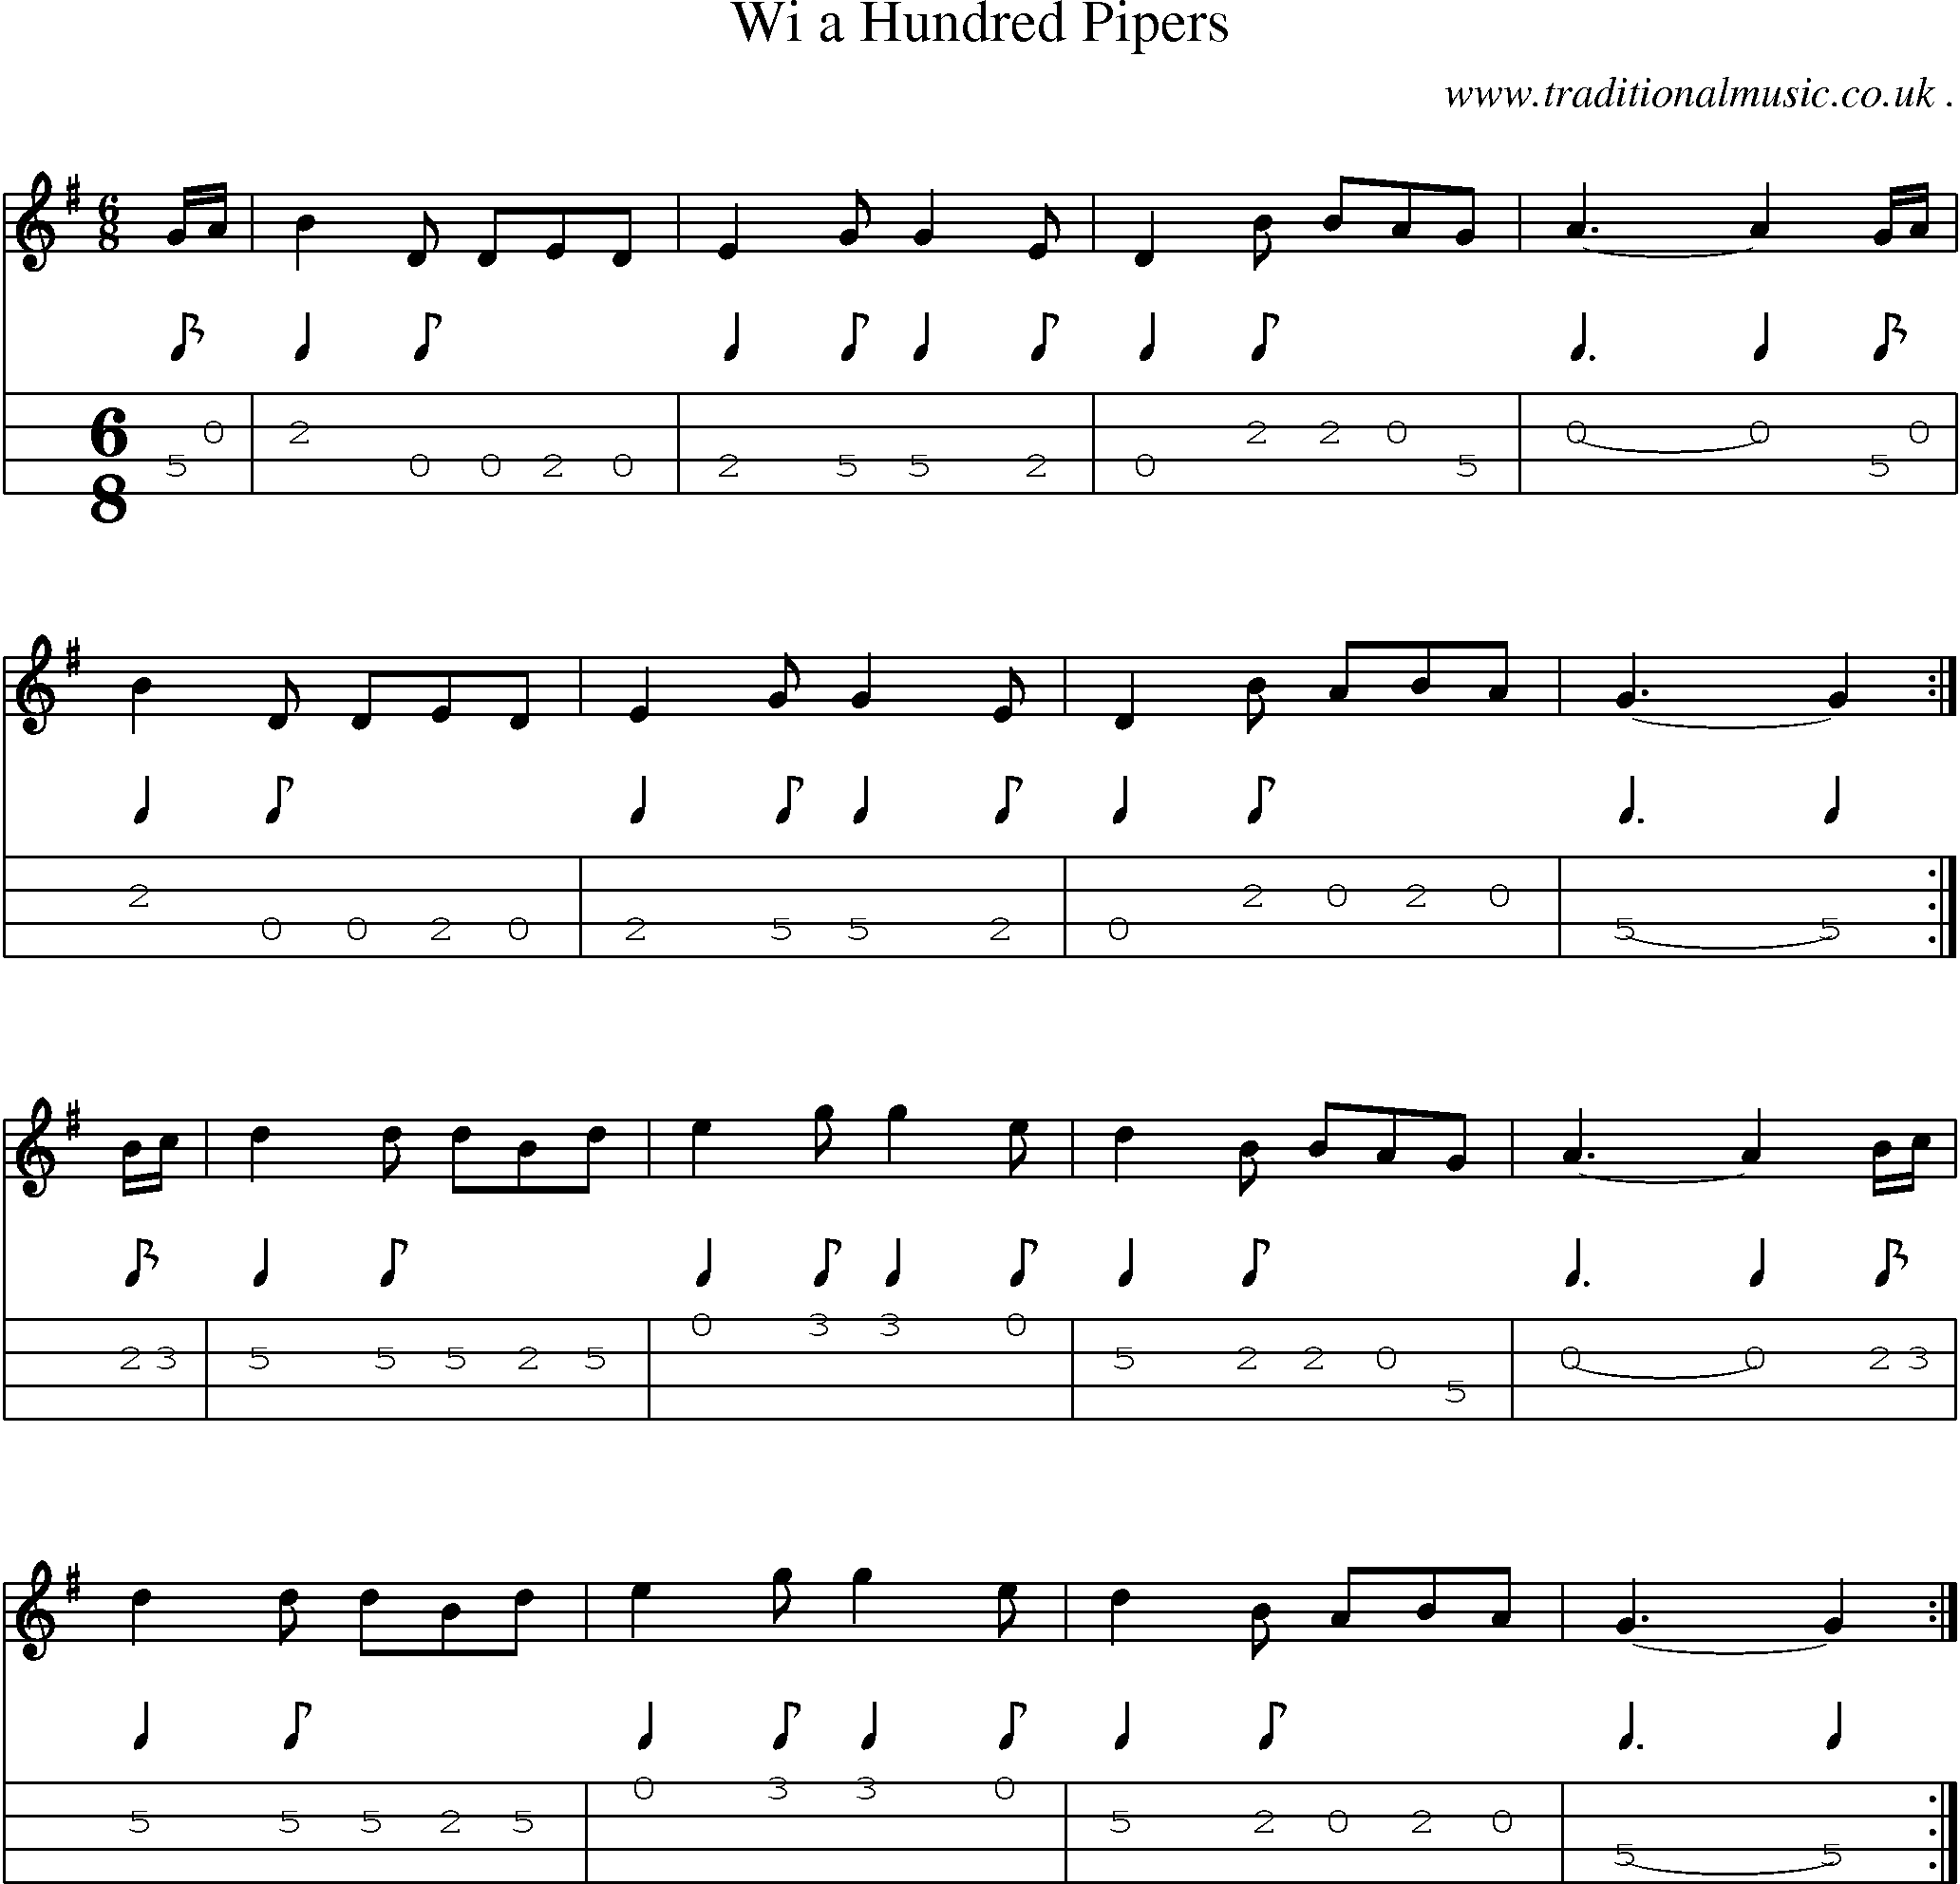 Sheet-music  score, Chords and Mandolin Tabs for Wi A Hundred Pipers